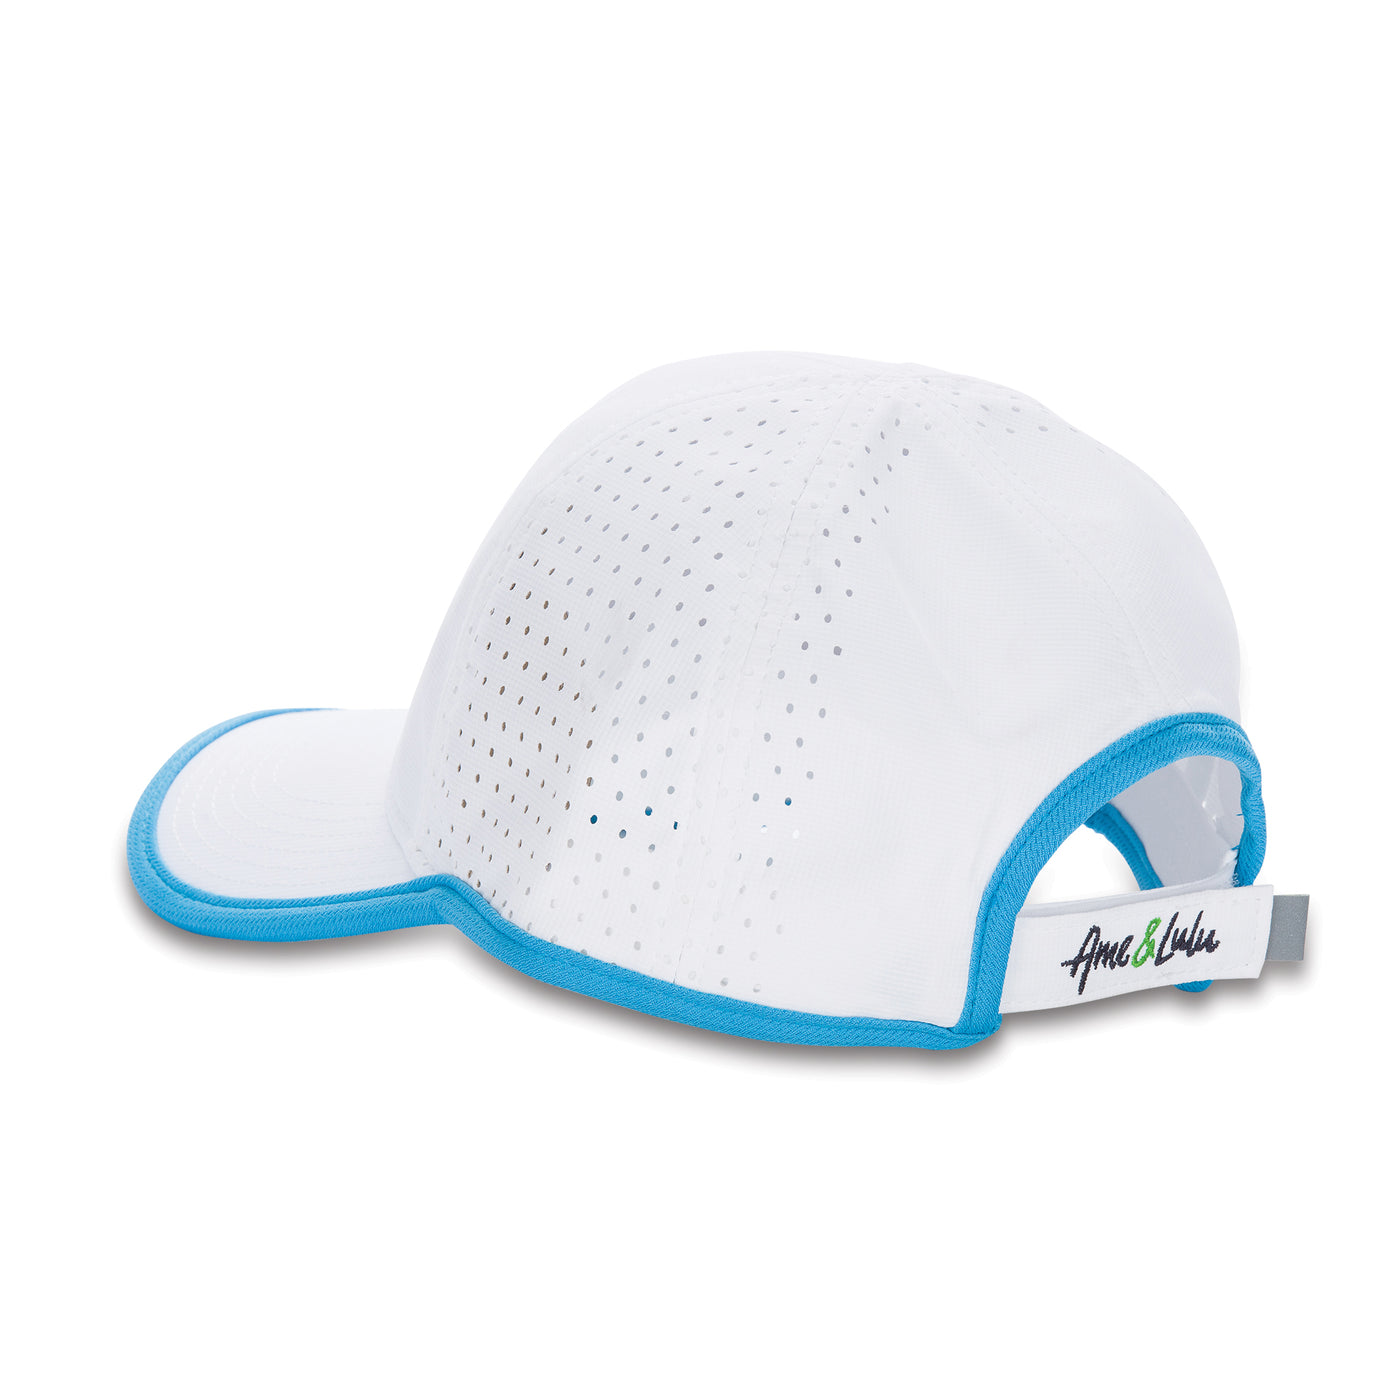 side view white sport hat with blue trim.